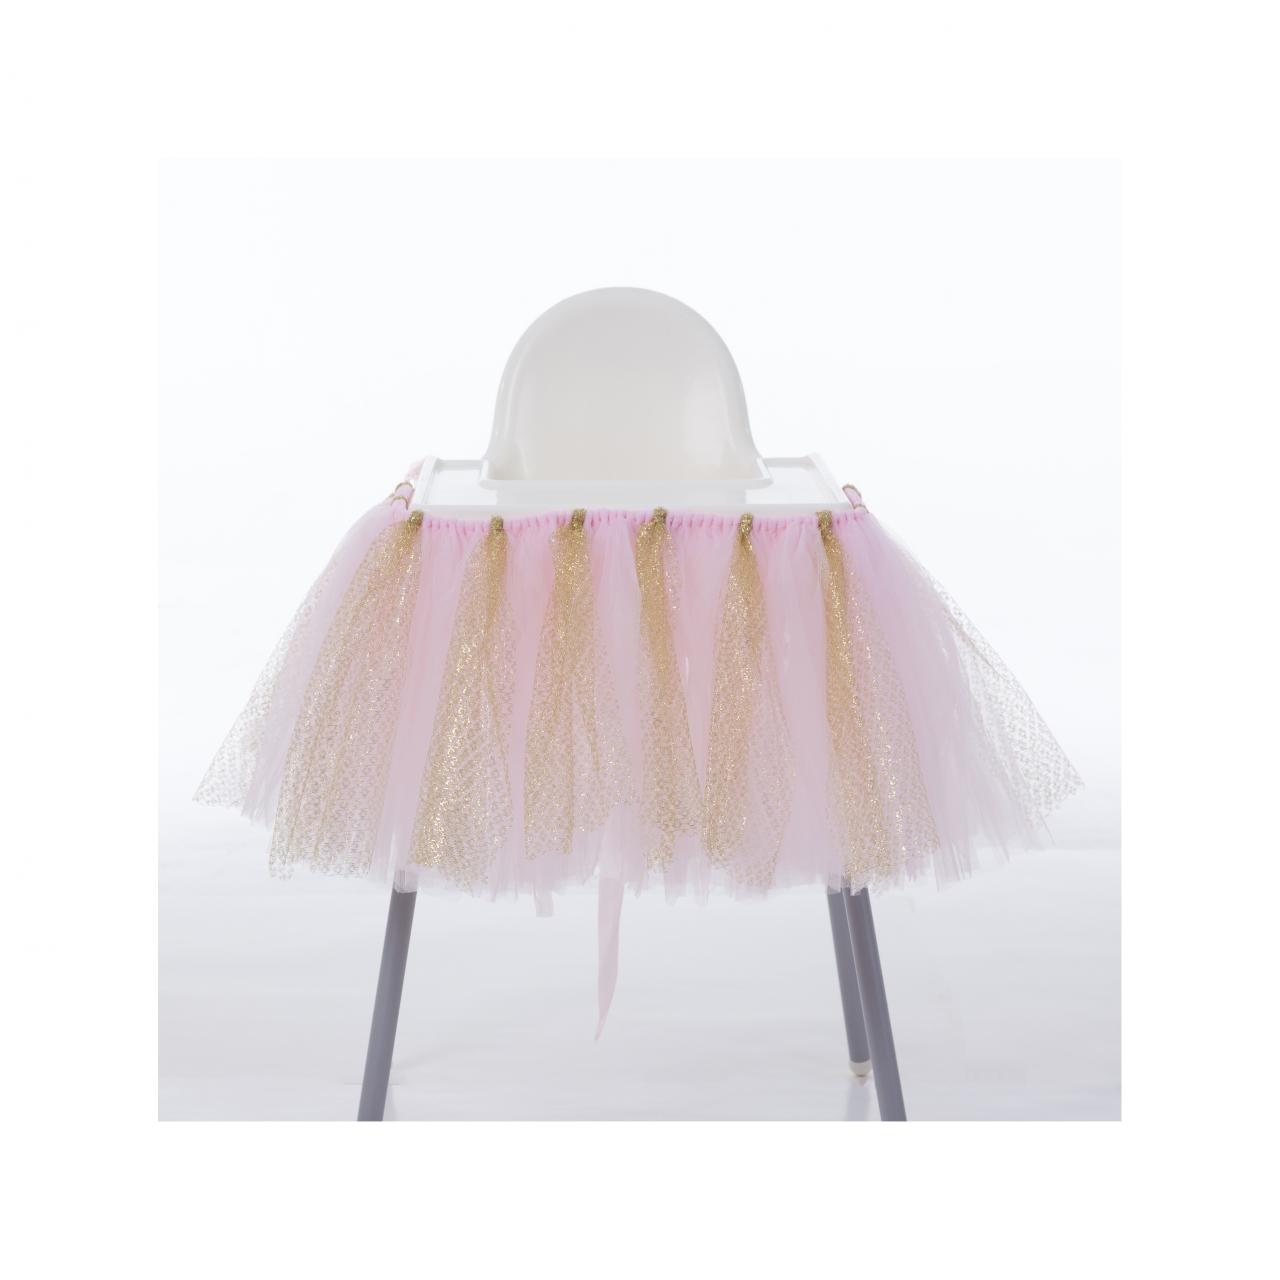 Tutu Tulle Table Skirts High Chair Decor Baby Shower Decorations for Boys Girls Party Set Birthday Party Supplies pink+gold